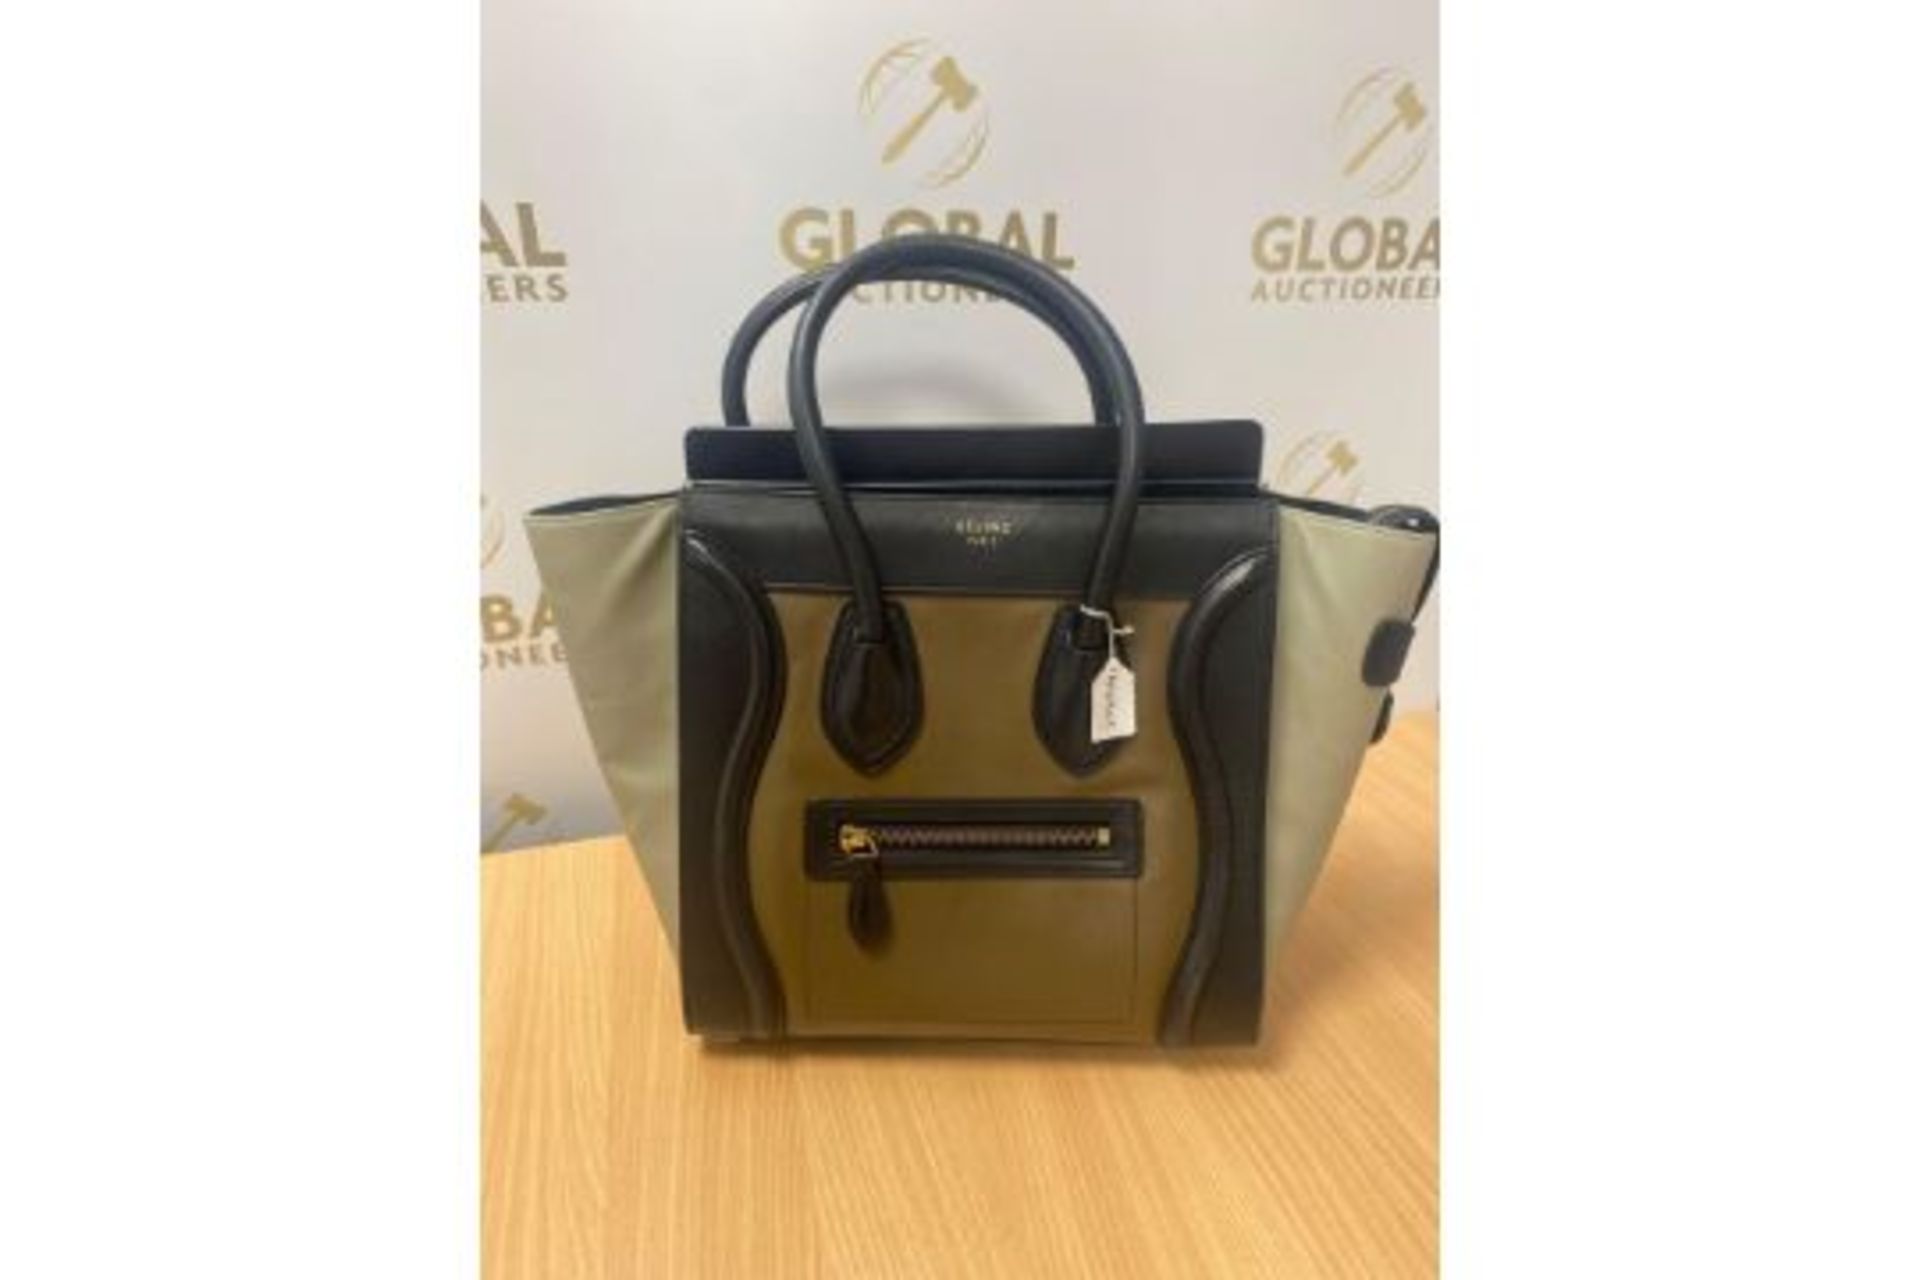 RRP £1,500 Celine Luggage Tricol Handbag, Céline 'Mini Luggage'. Open with A Zipper On Top And Is